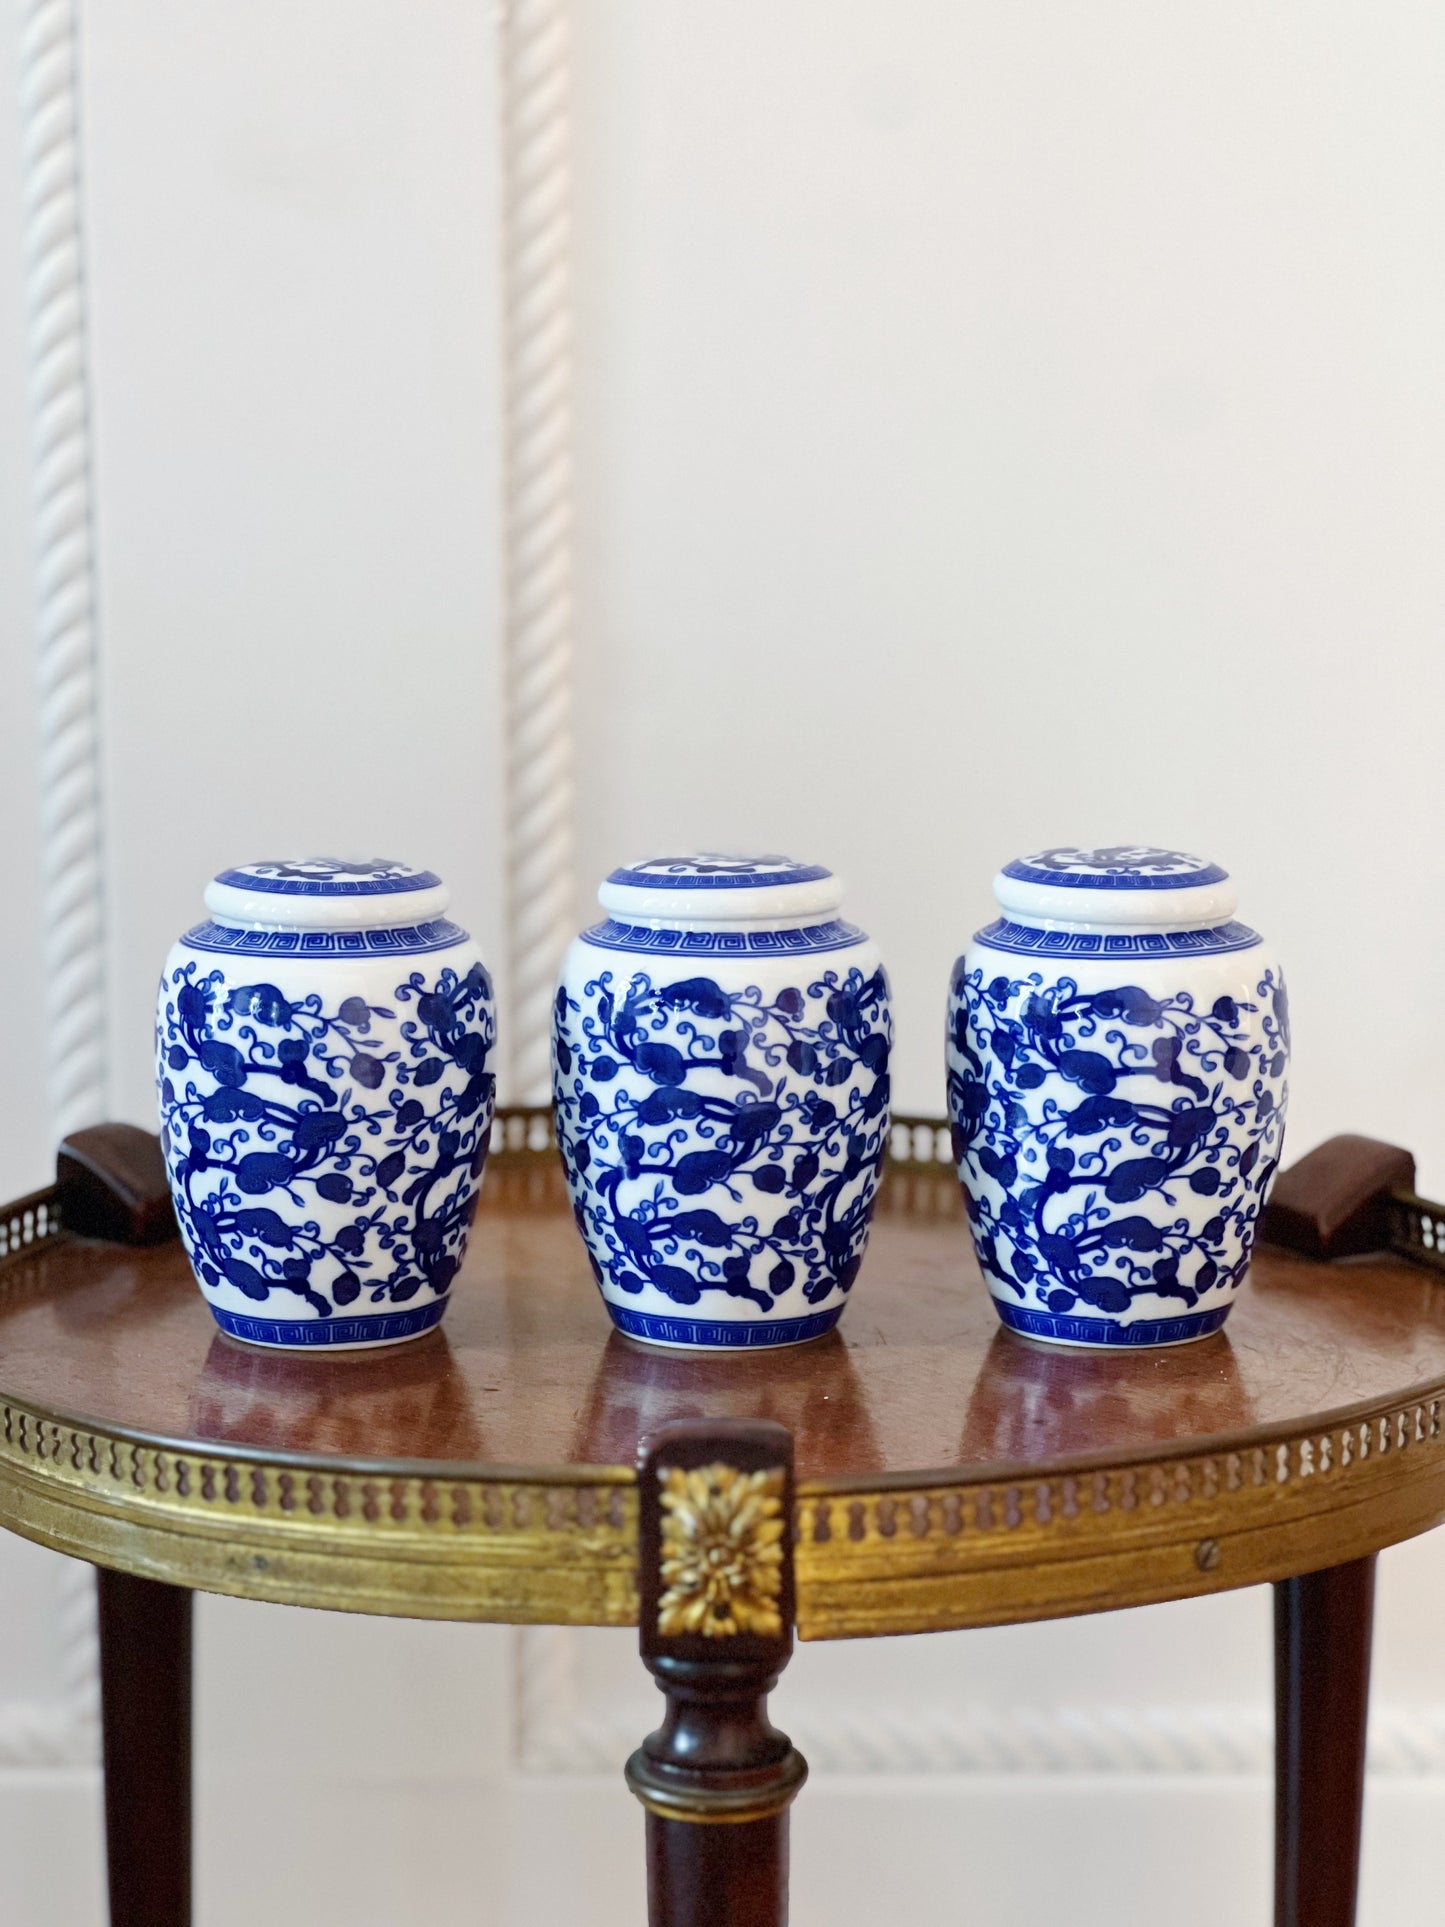 petite vintage blue and white ginger jars with lids on round wooden table